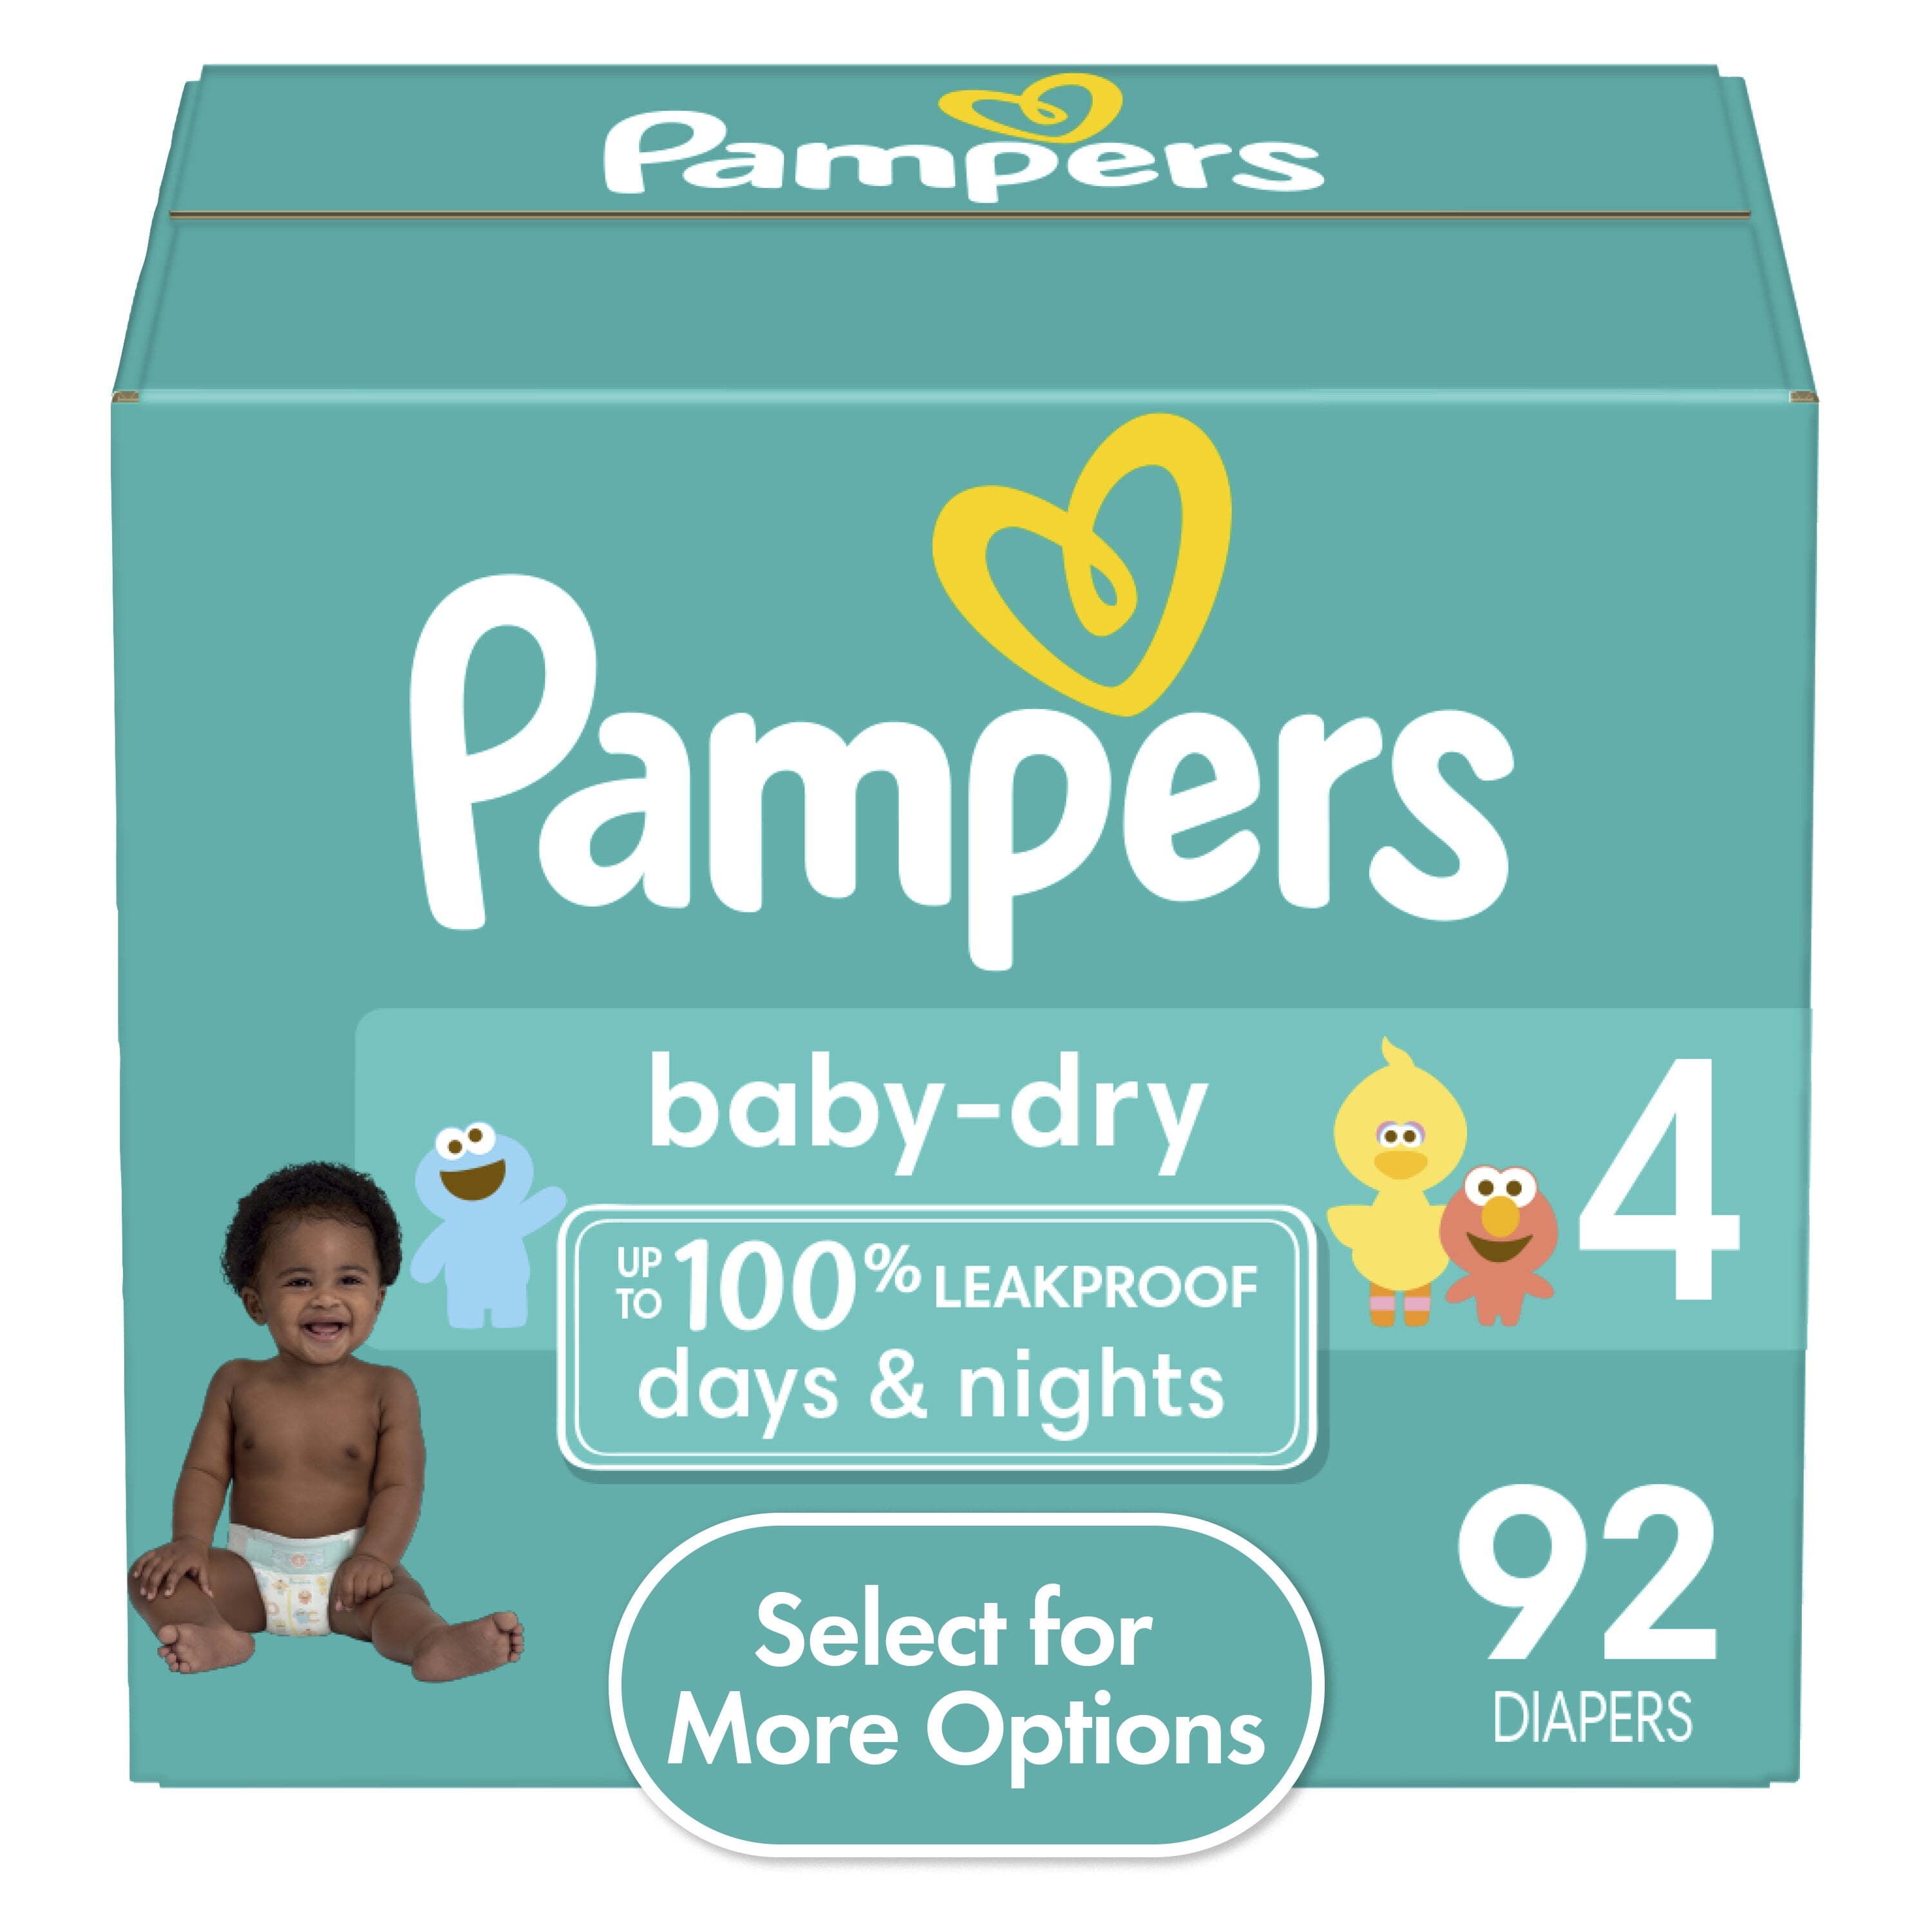 Pampers Baby-Dry Diapers, Size 4 - 92 pack